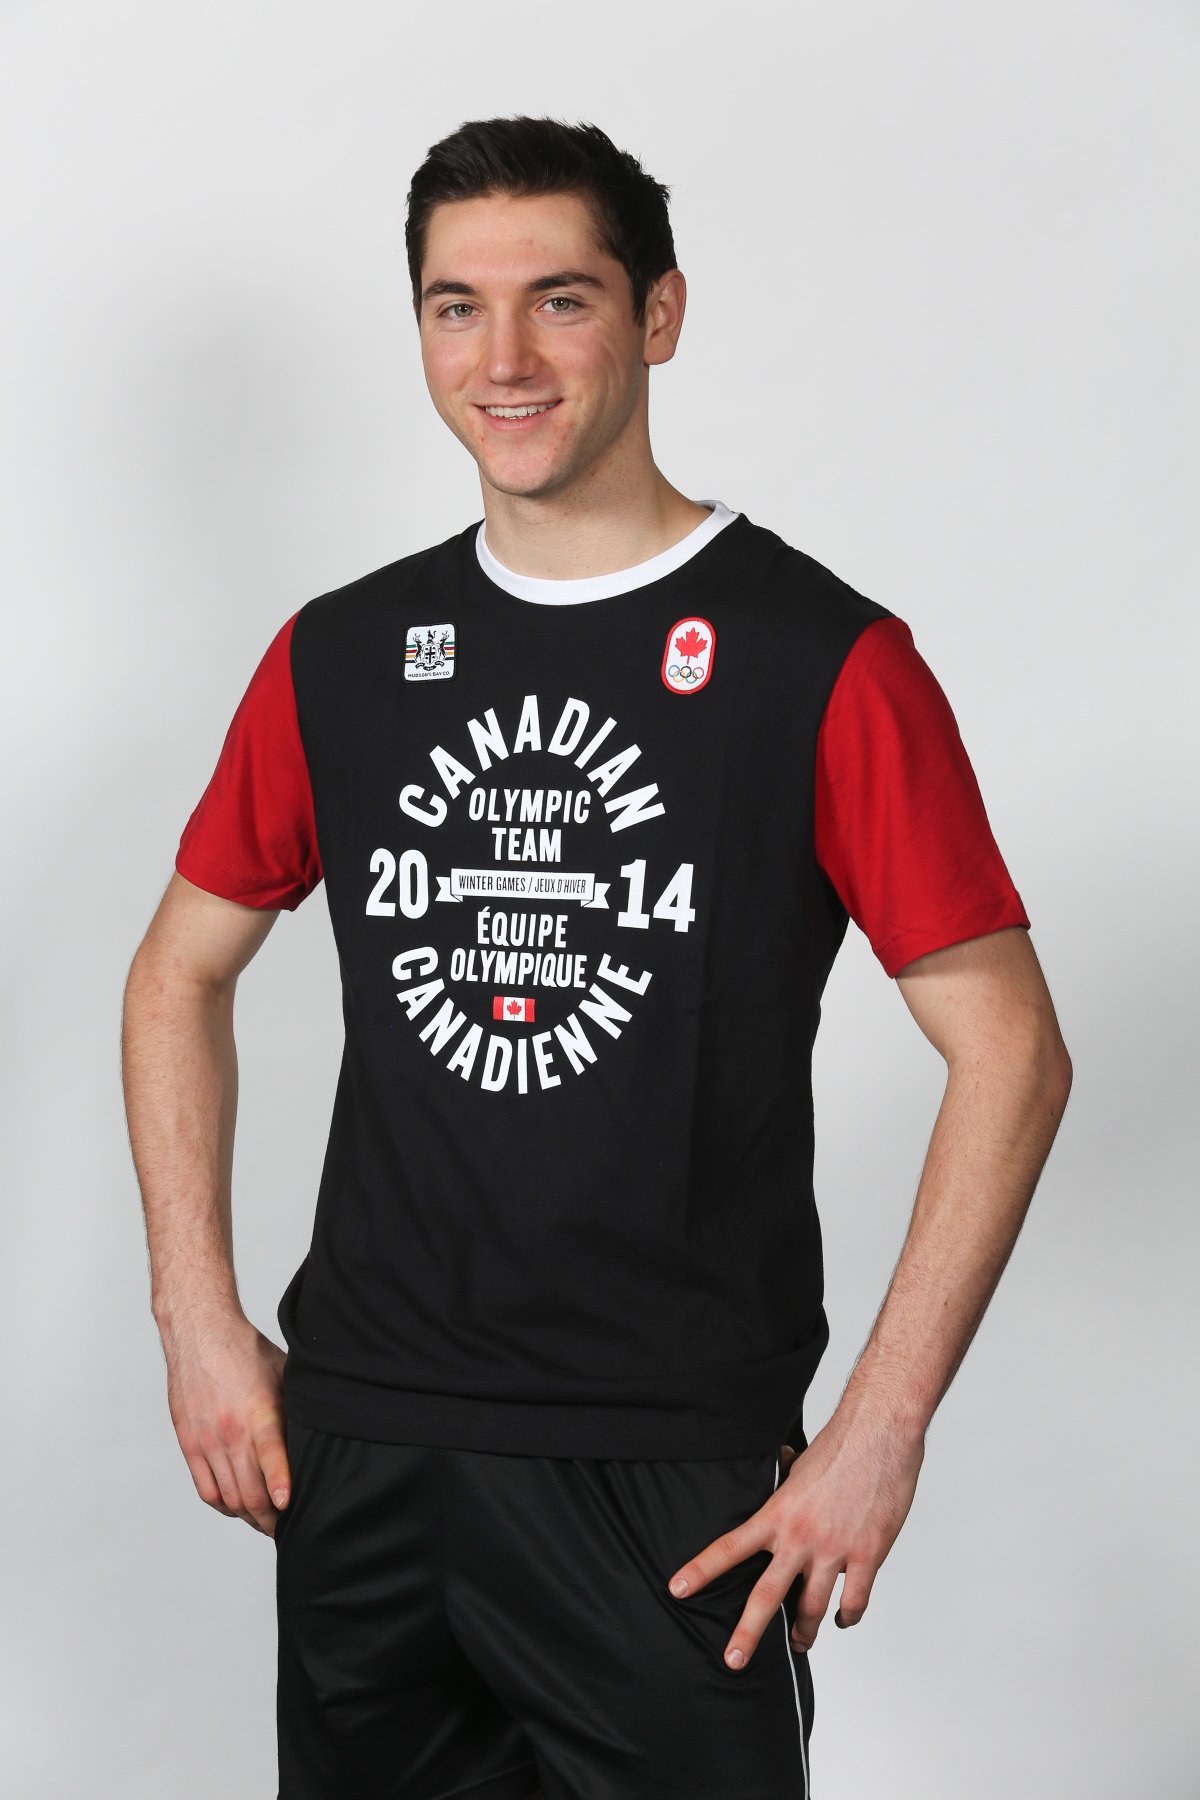 Vincent de Haitre. Long track speed skaters were formally nominated to the Canadian Olympic team for the Sochi 2014 Olympic Winter Games in Calgary, Wednesday, Janurary 22, 2014.